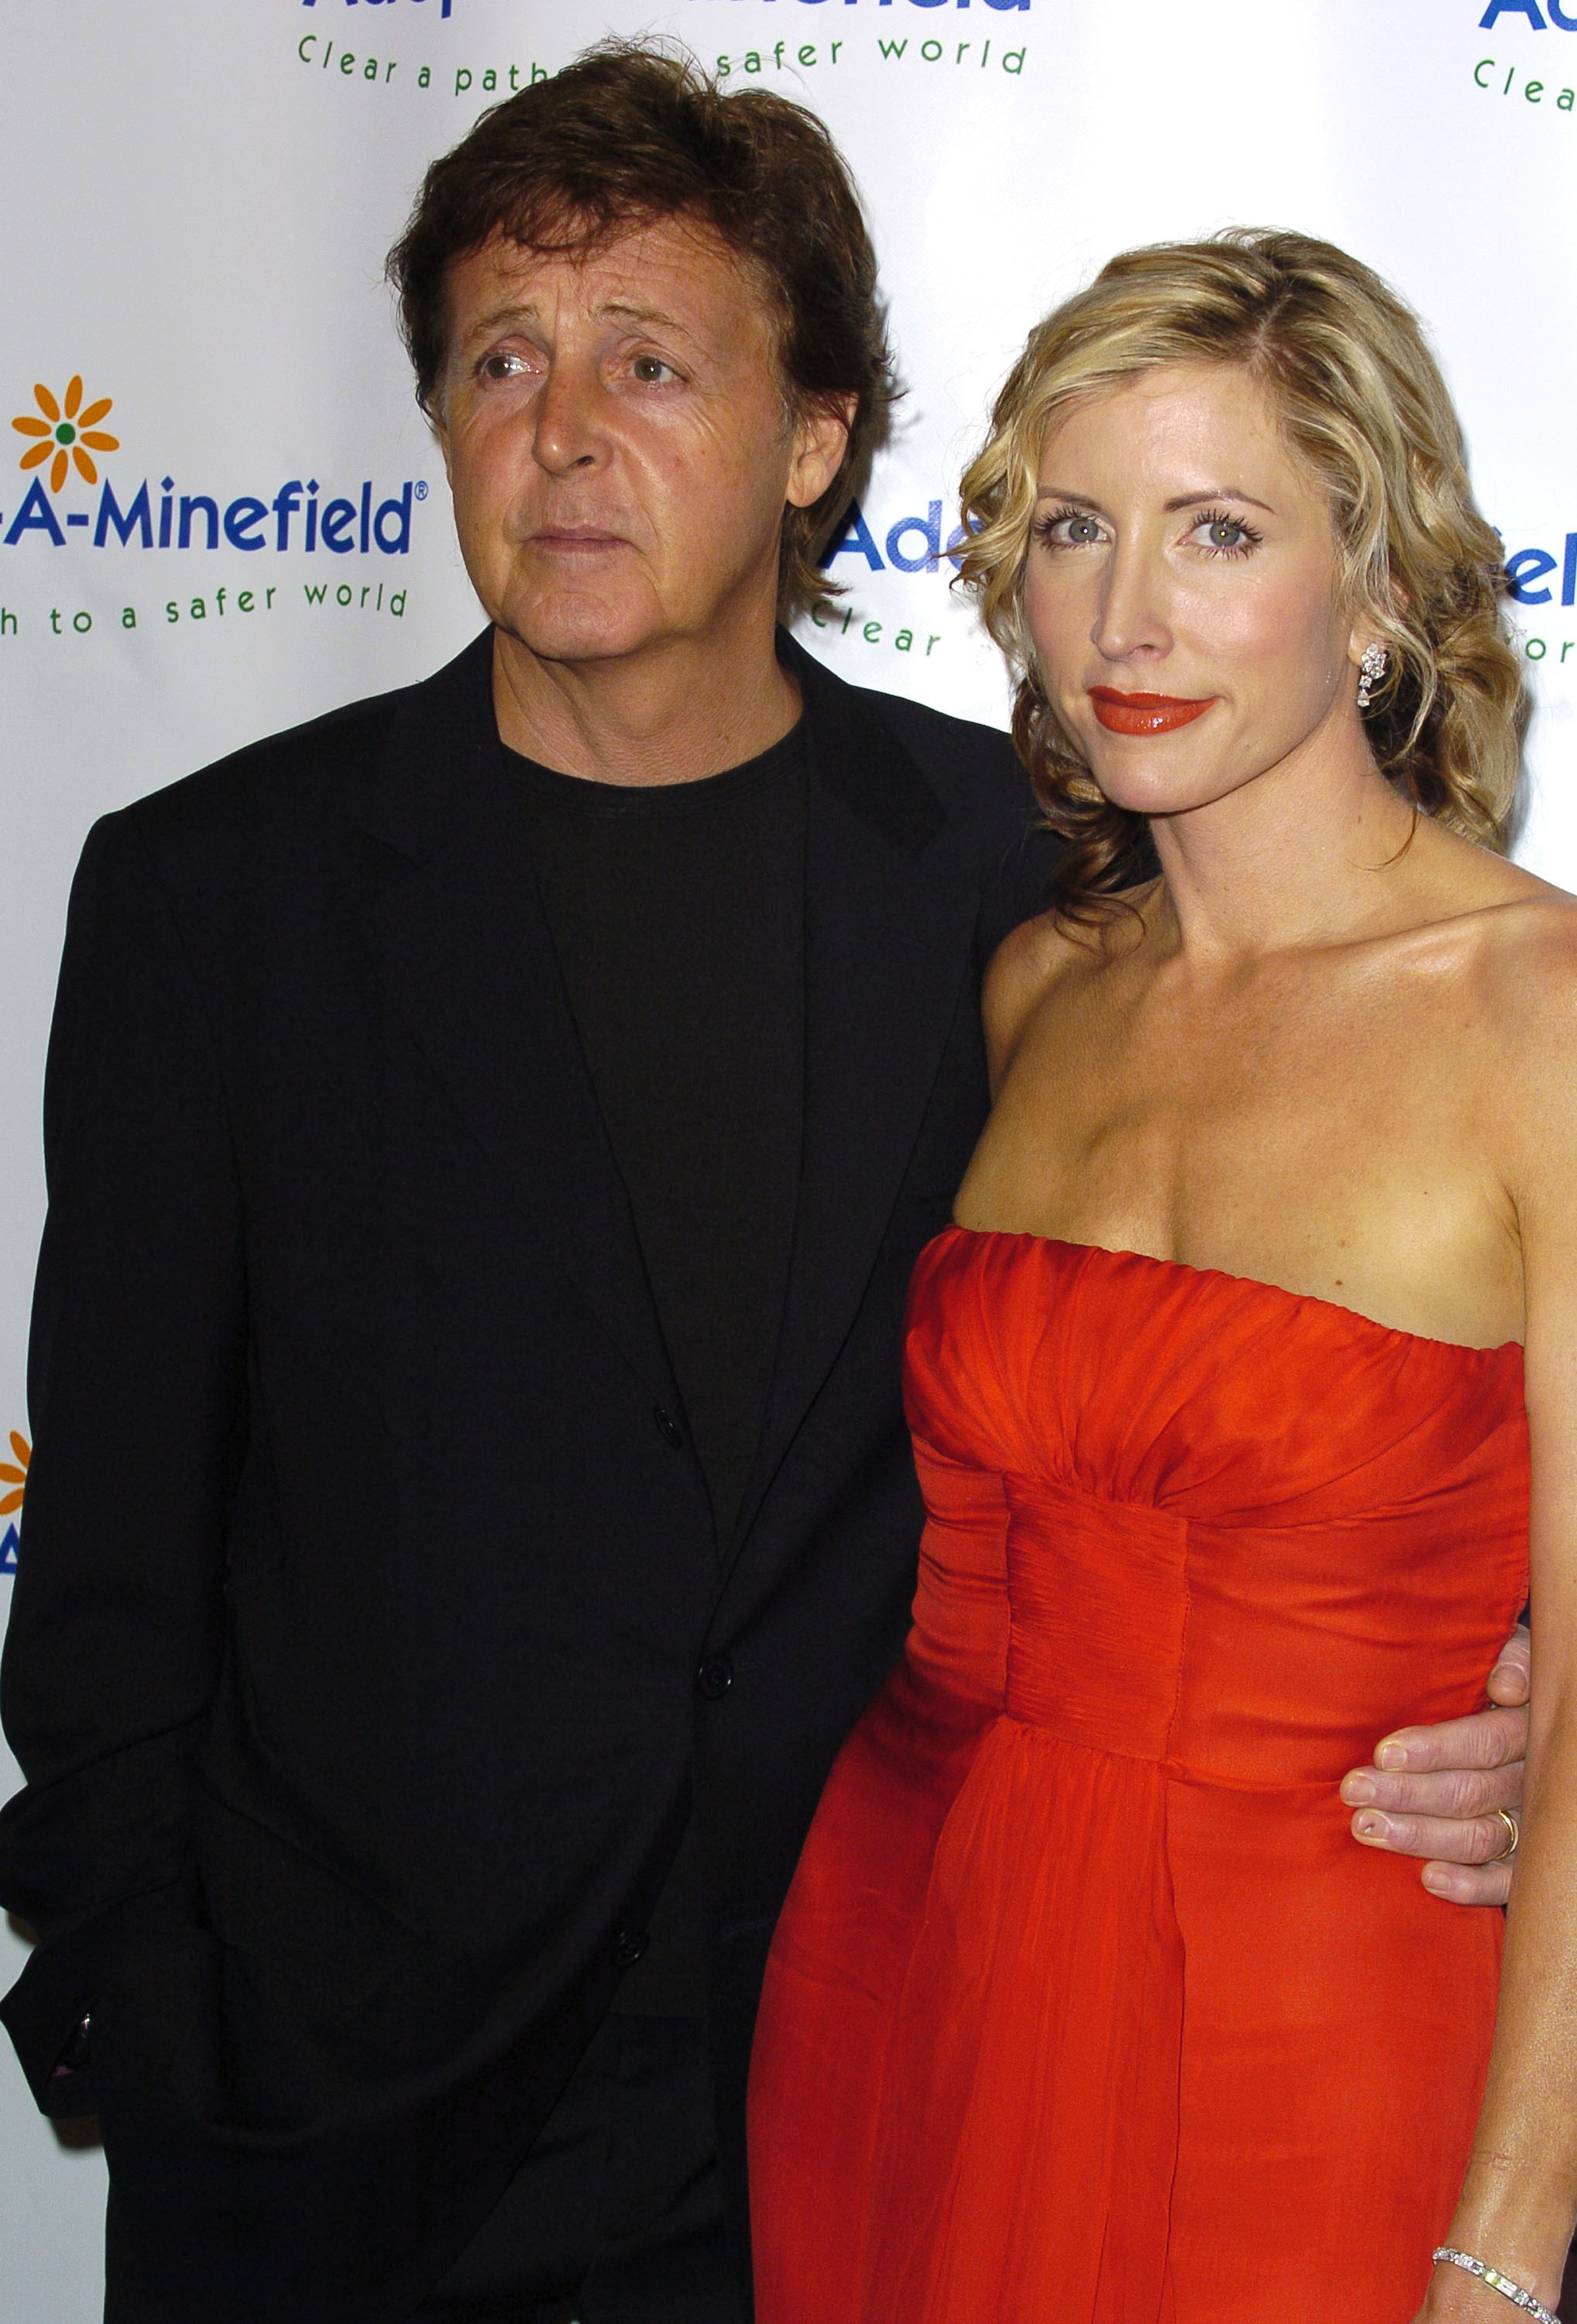 Paul McCartney and Heather Mills at the 4th Annual Adopt-A-Minefield Gala in 2004. | Source: Getty Images